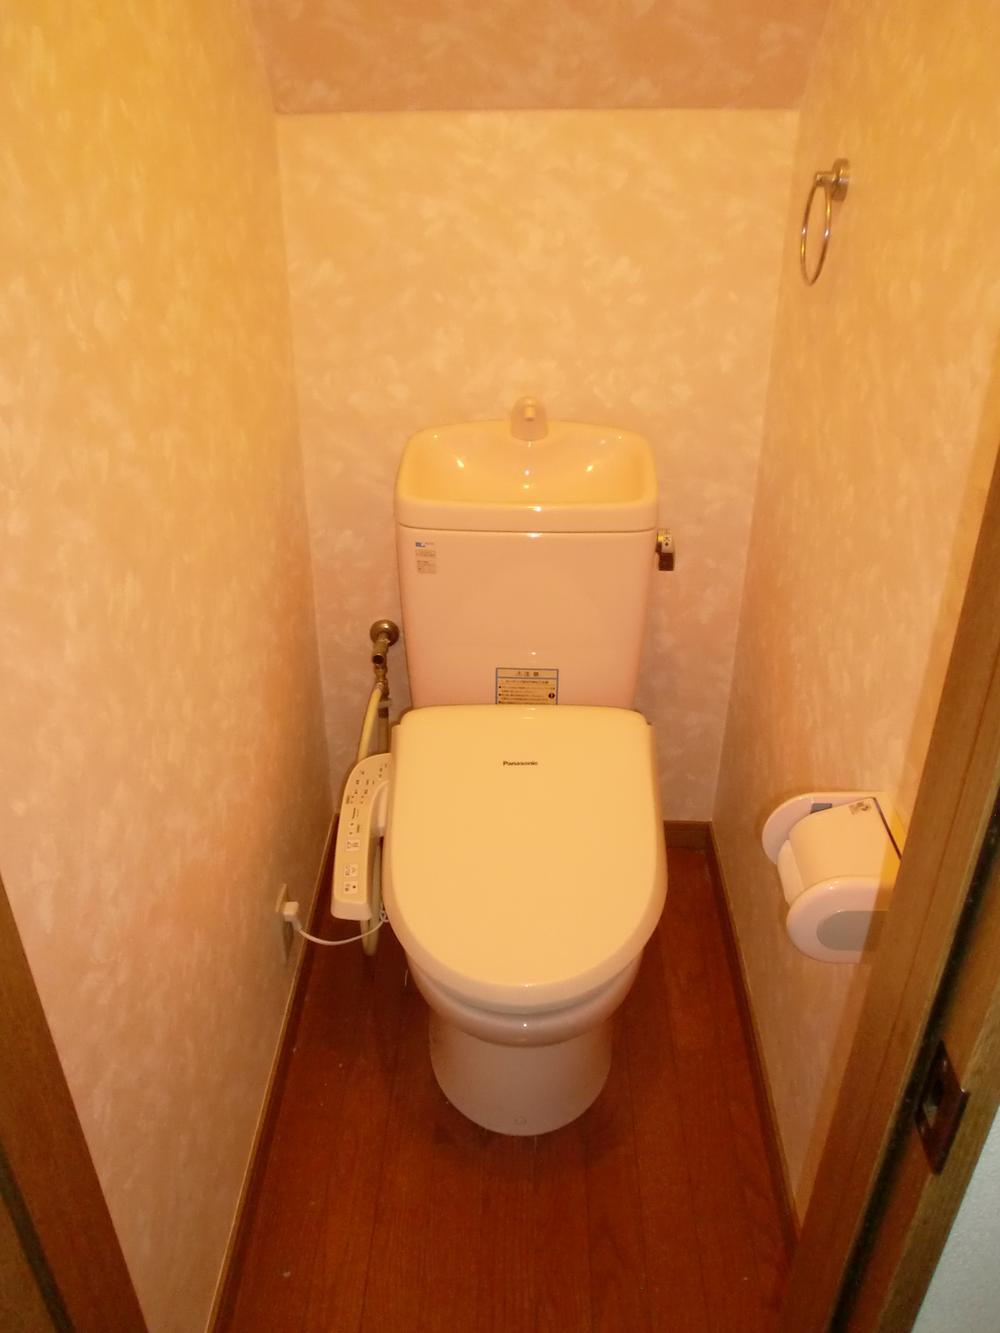 Toilet. It is convenient because the toilet is two places. 